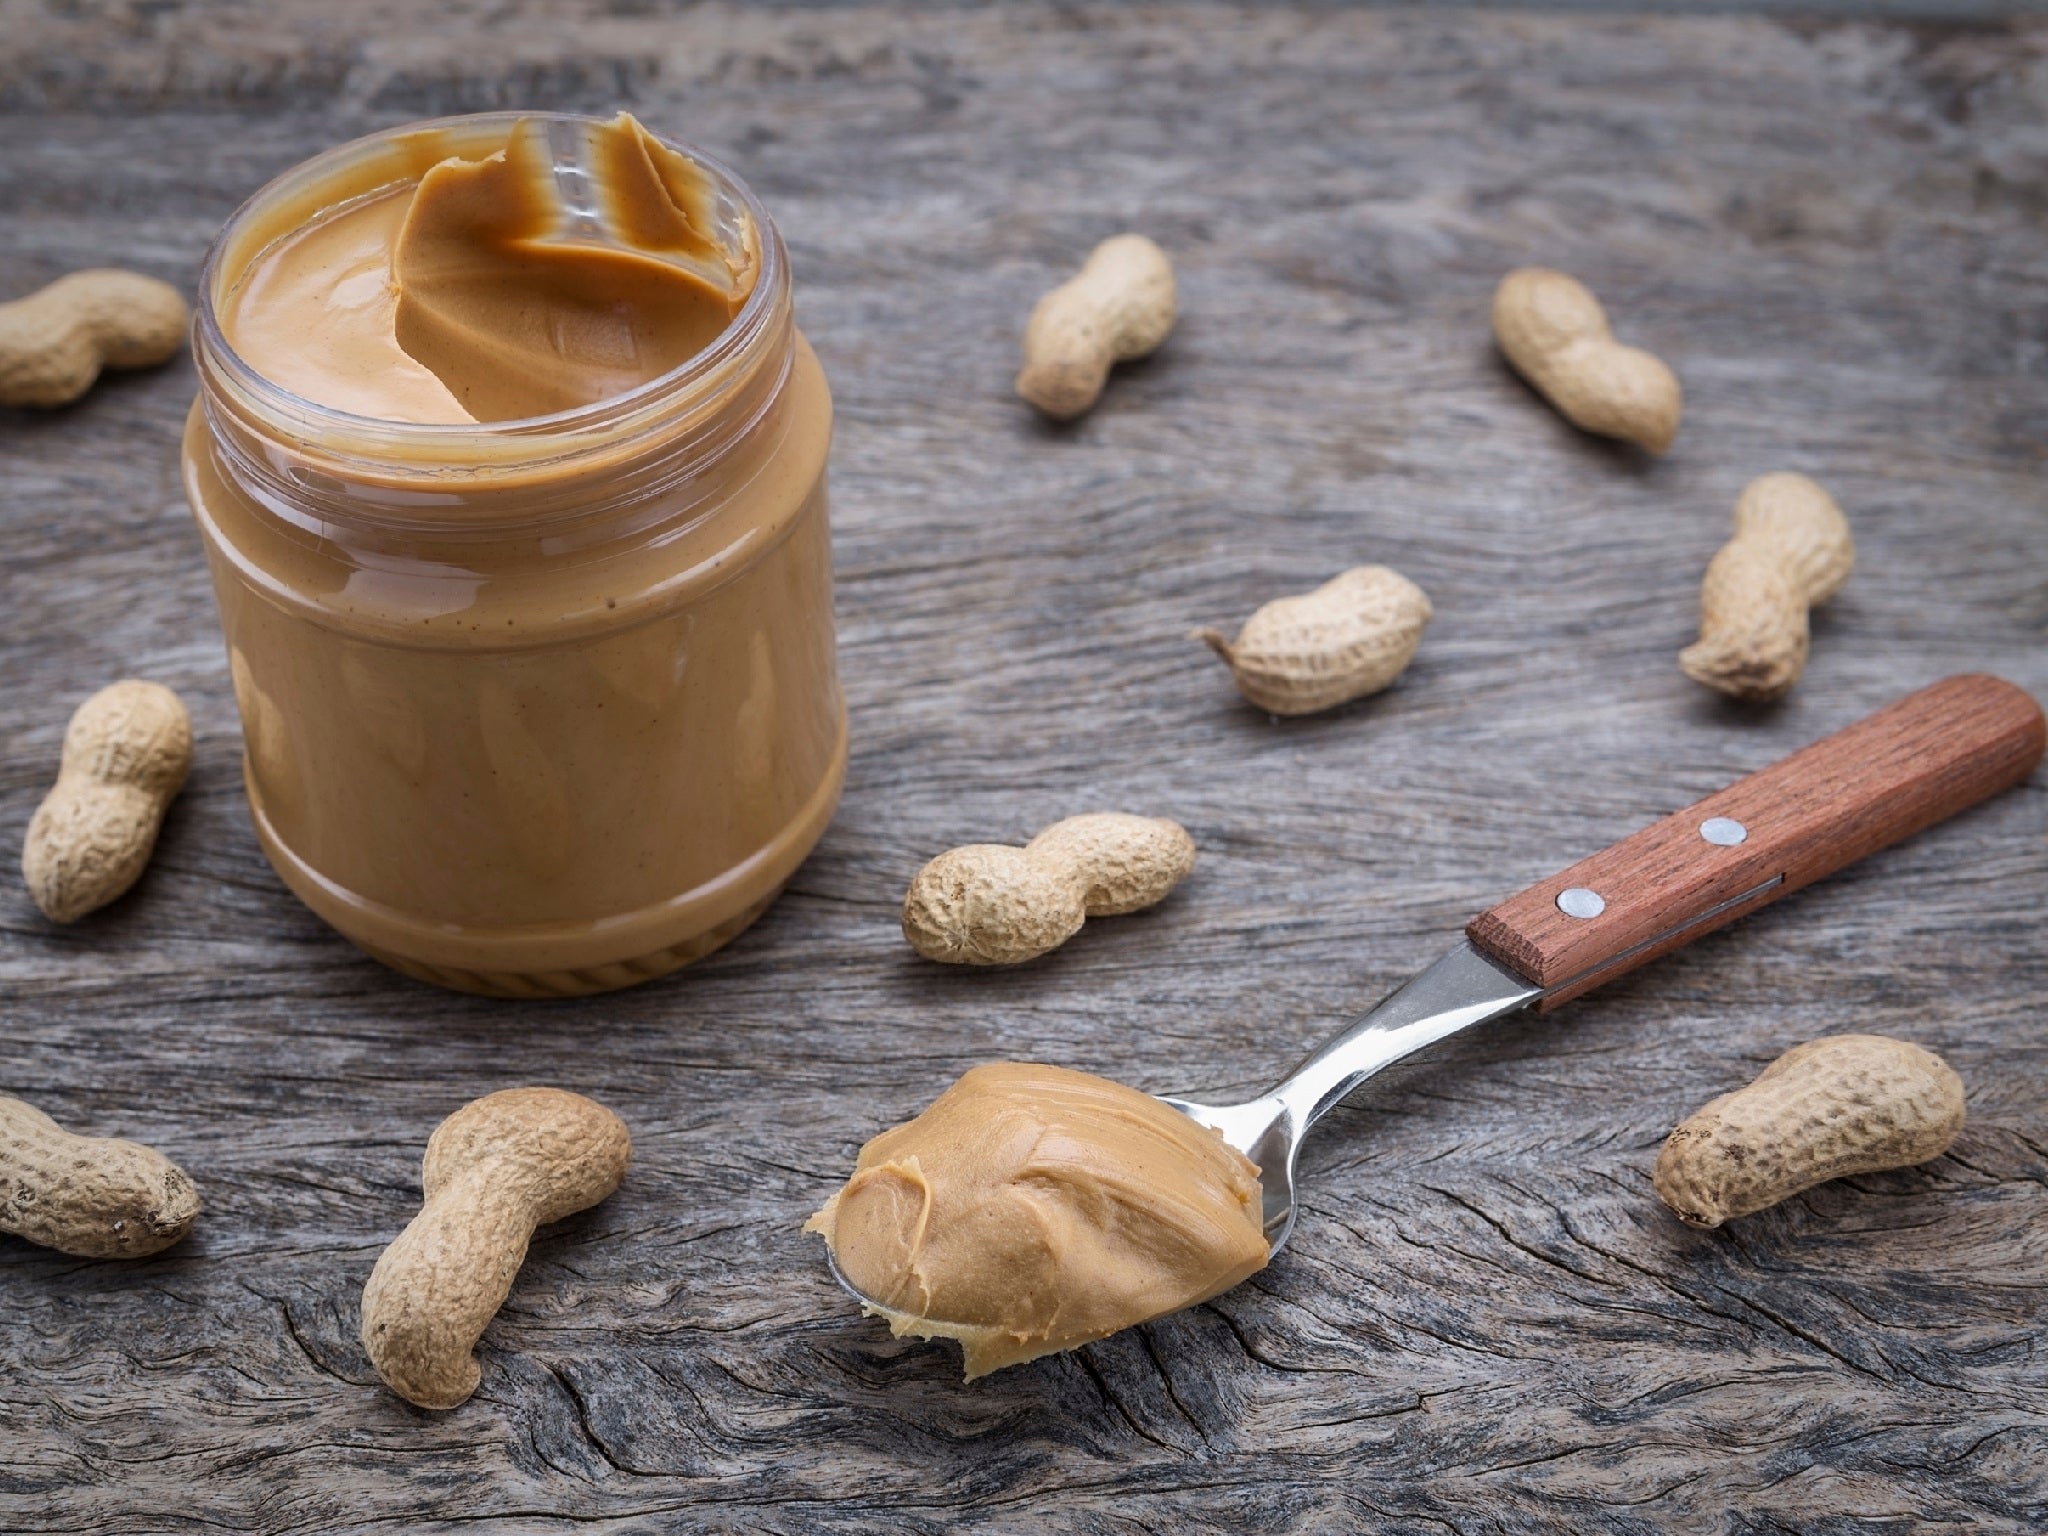 Egg and peanut sensitivities are the most common allergies in infants and toddlers.